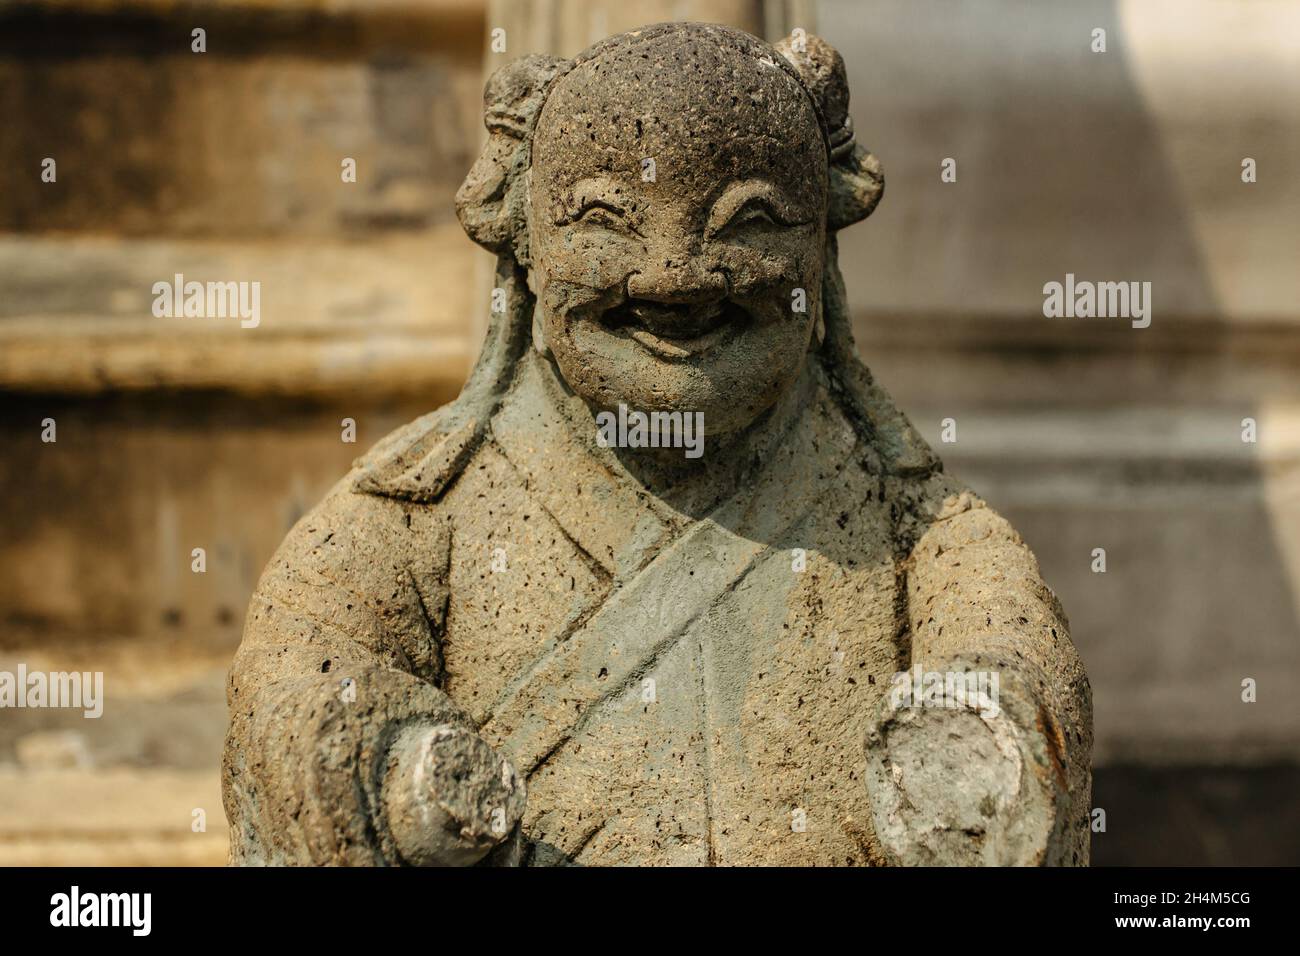 Bangkok, Thailand-January 16,2020.Chinese guardian figure, Warrior Sculpture in Wat Pho Buddhist temple complex.Detail of old stone statue.Popular Stock Photo